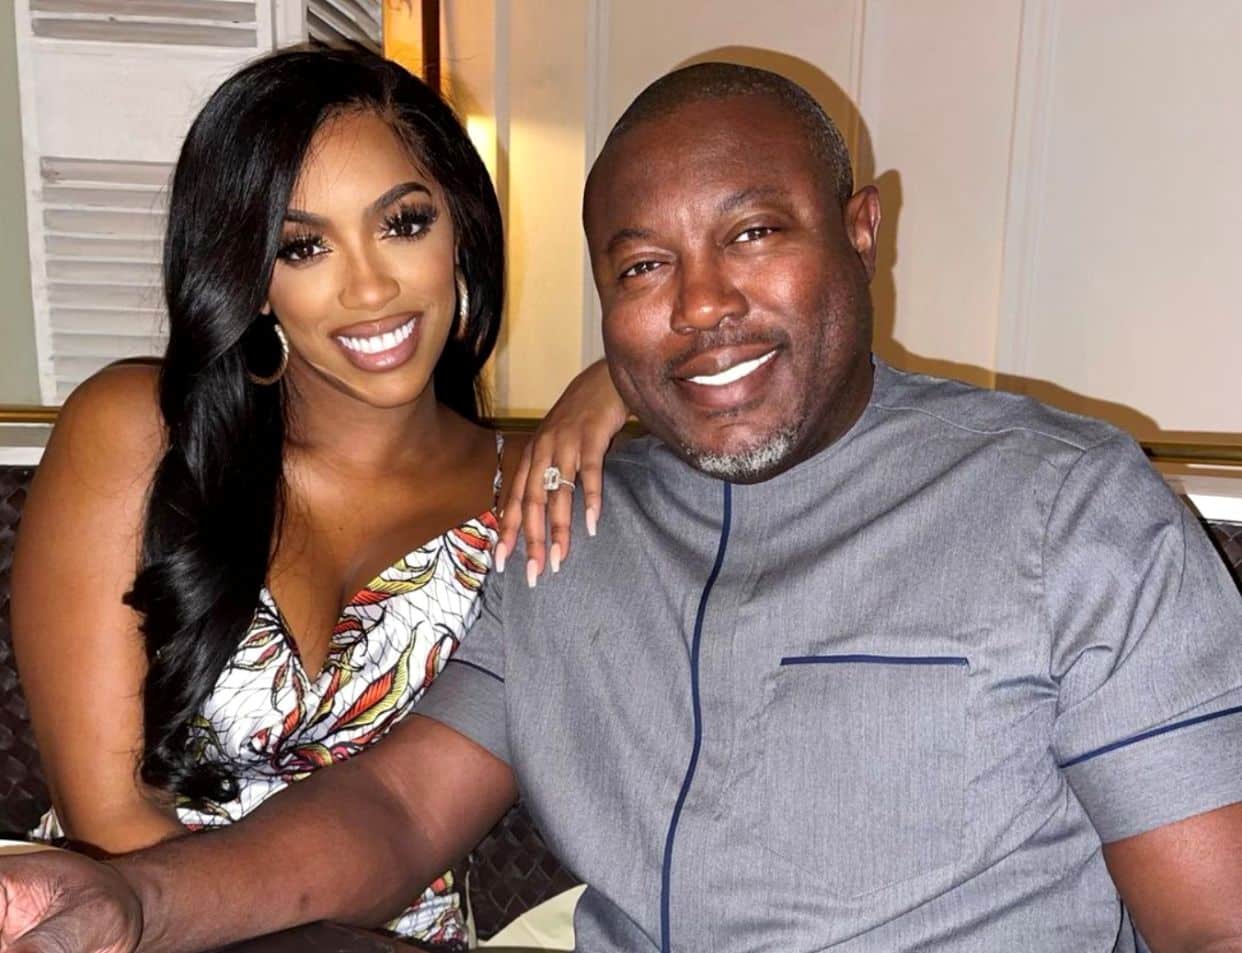 VIDEO: Porsha Williams' Family Questions Relationship With Simon in 'RHOA' Spinoff Porsha's Family Matters, Plus Dennis Suggests Things Aren't Over